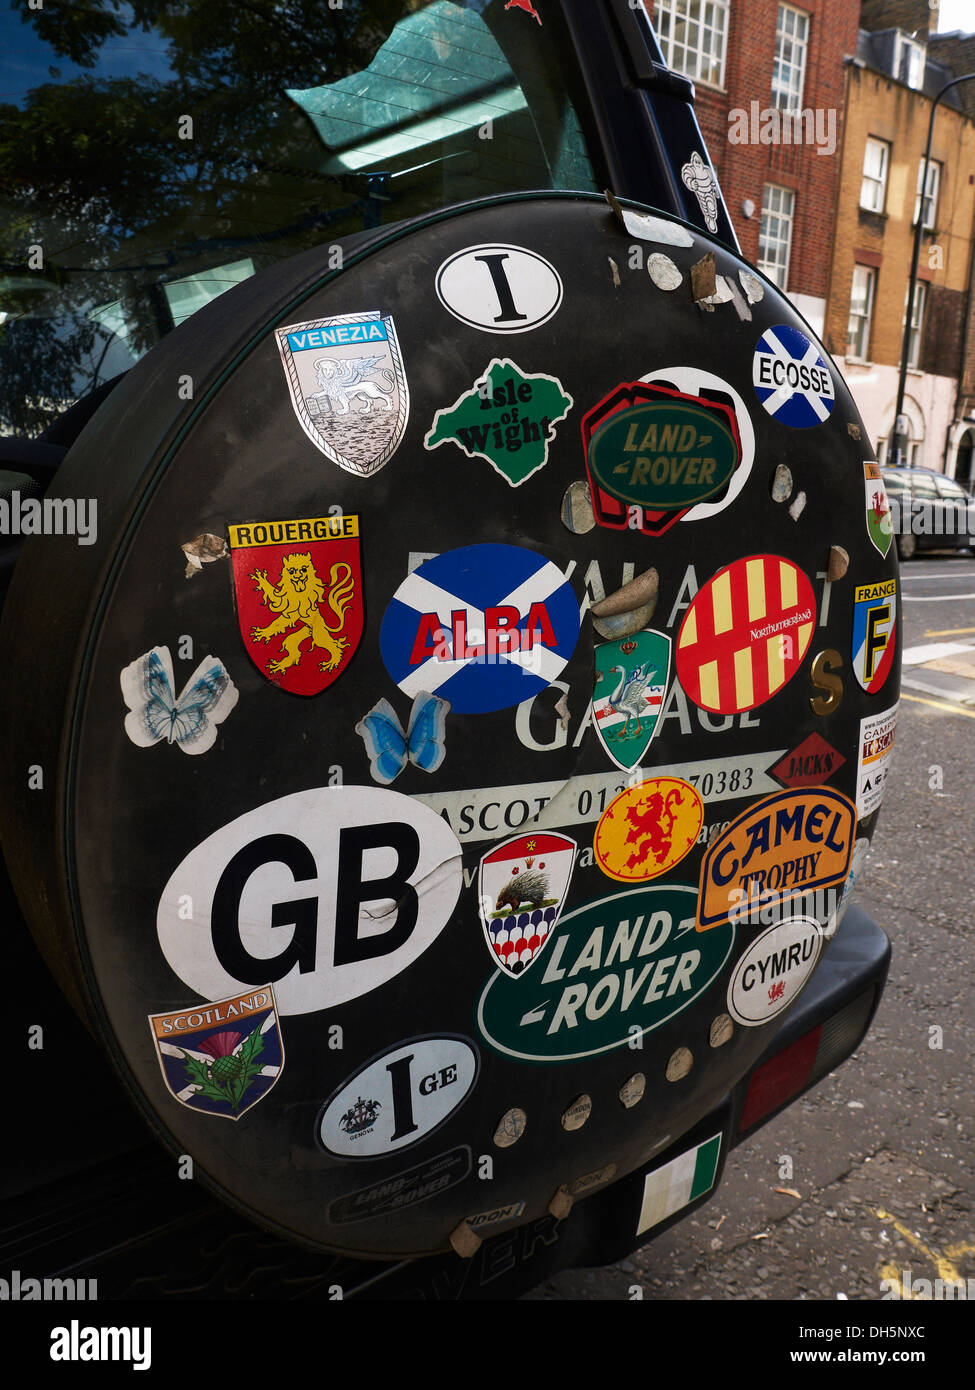 stickers-on-the-spare-wheel-cover-of-a-landrover-discovery-DH5NXC.jpg